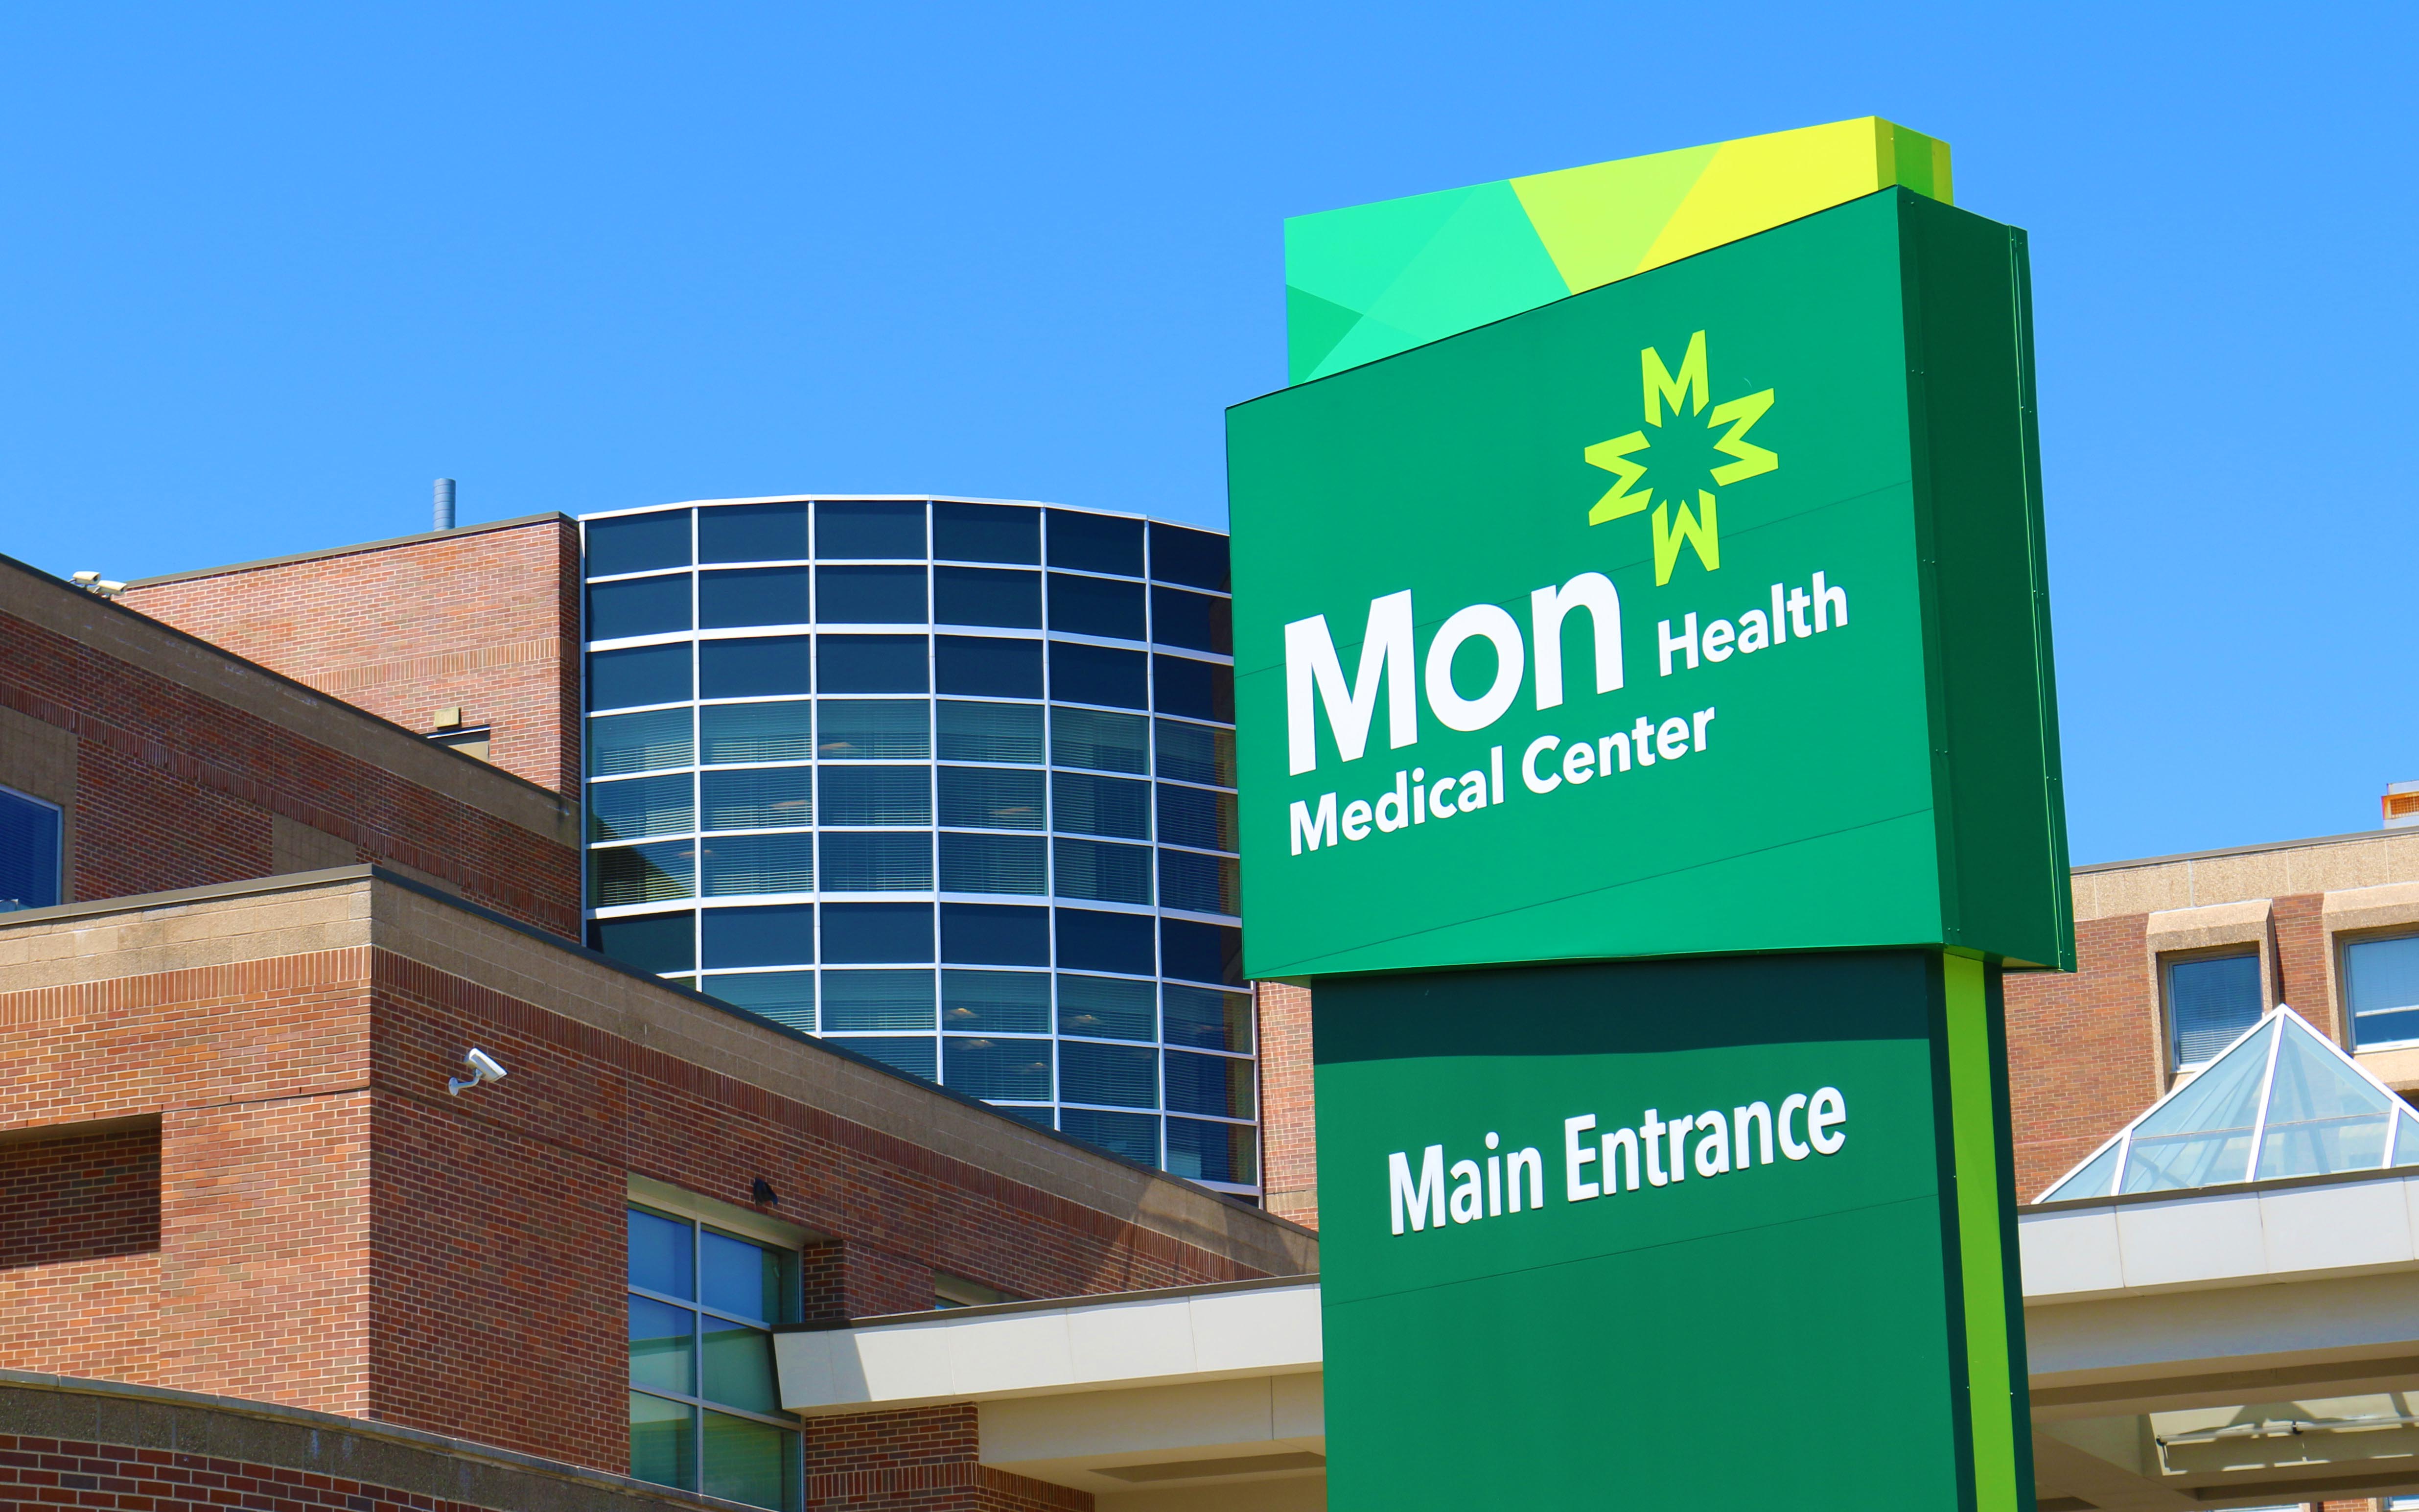 Mon Health Medical Center Awarded Acute Stroke Ready Certification from The Joint Commission